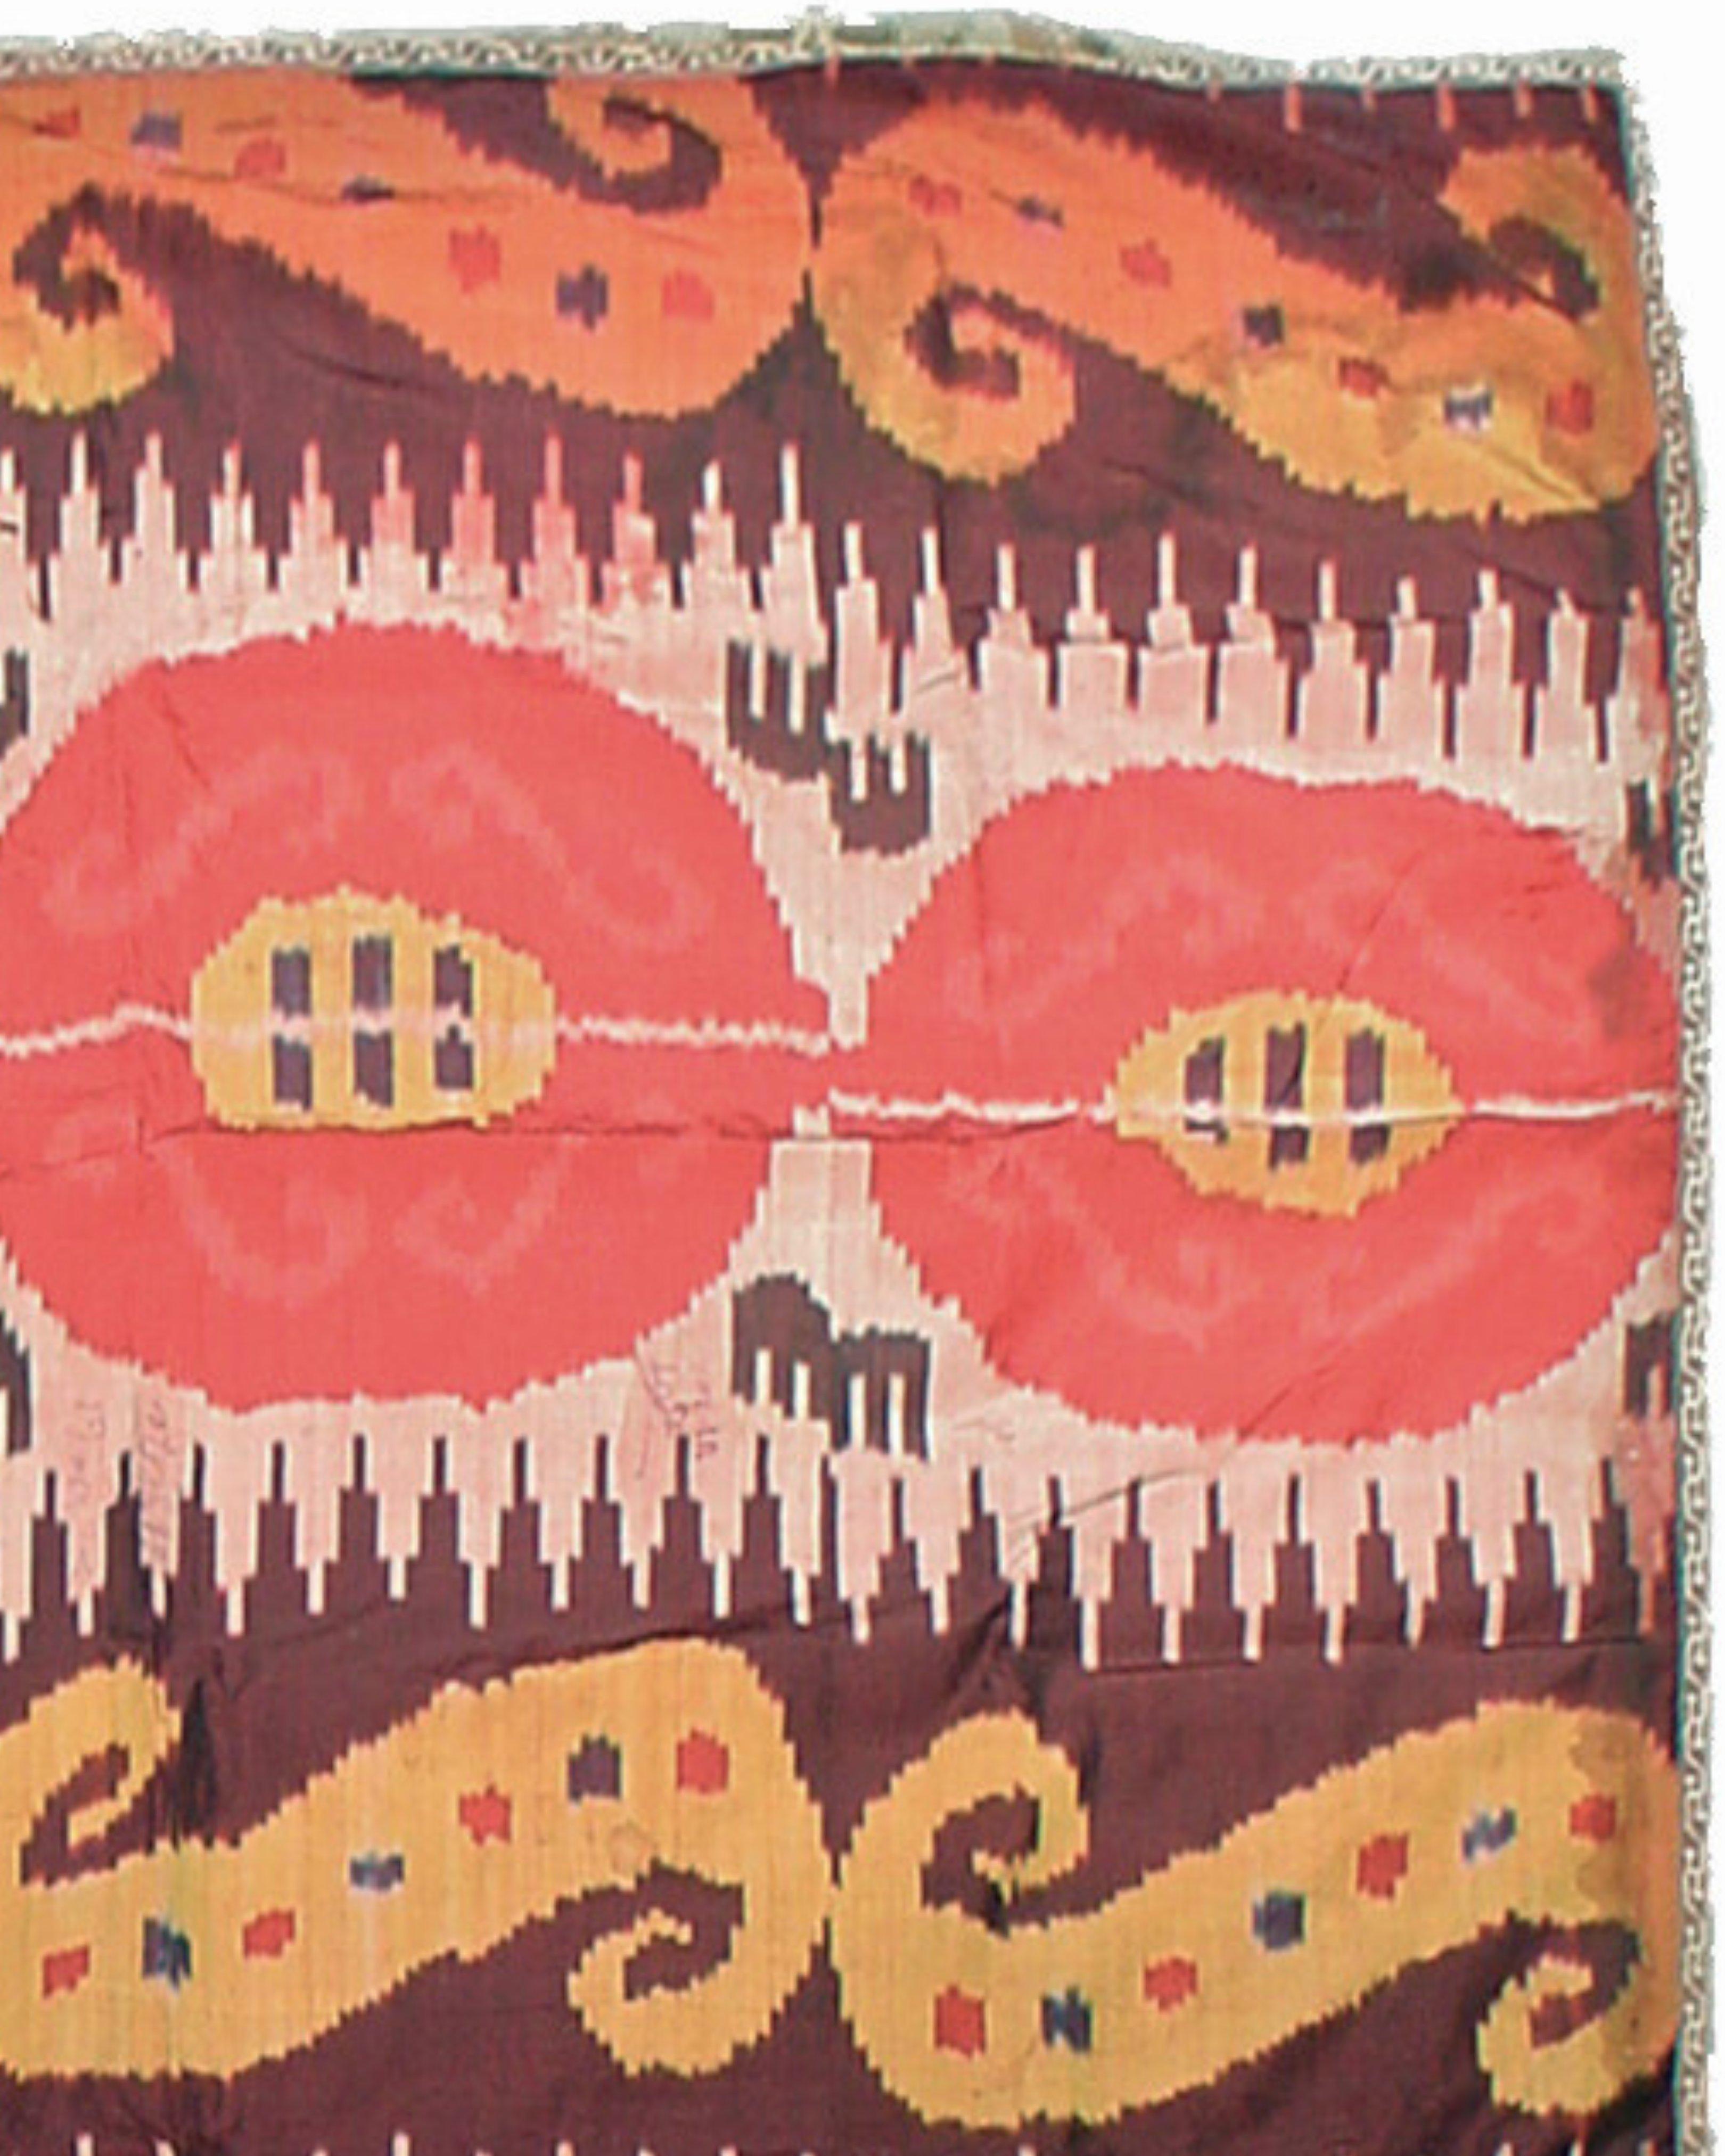 Antique Ikat Cover Textile, Late 19th Century

Additional Information:
Dimensions: 4'10